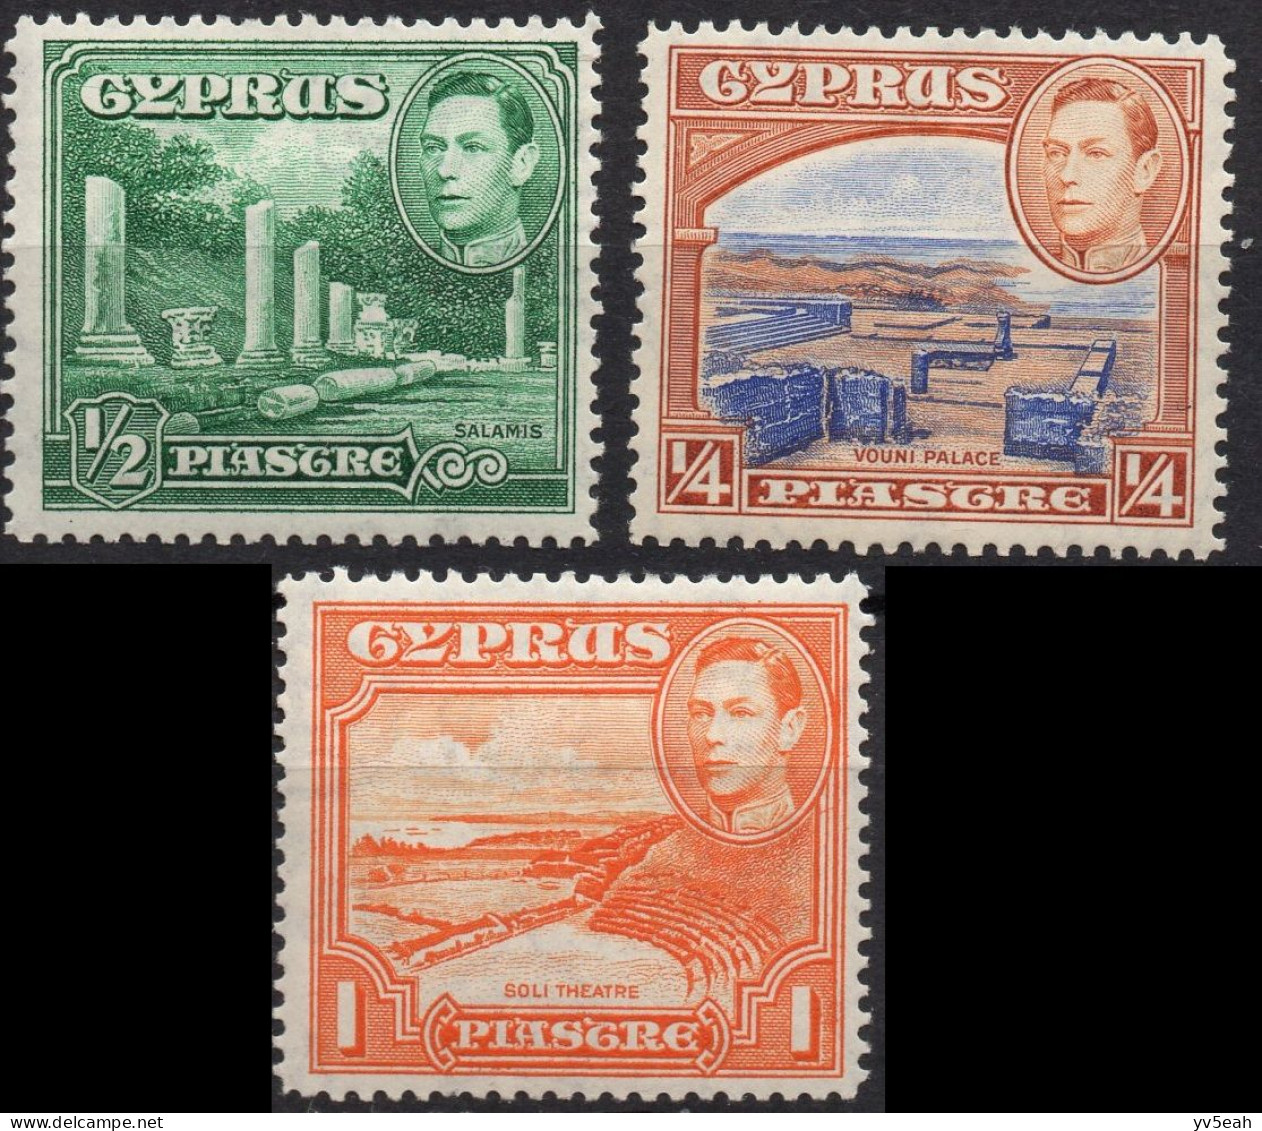 CYPRUS/1938-44/MH/SC#143-4, 146/ OLD ARCHITECTURE / BUILDINGS / PICTORIAL / KING GEORGE VI / KGVI / PARTIAL SET - Chypre (...-1960)